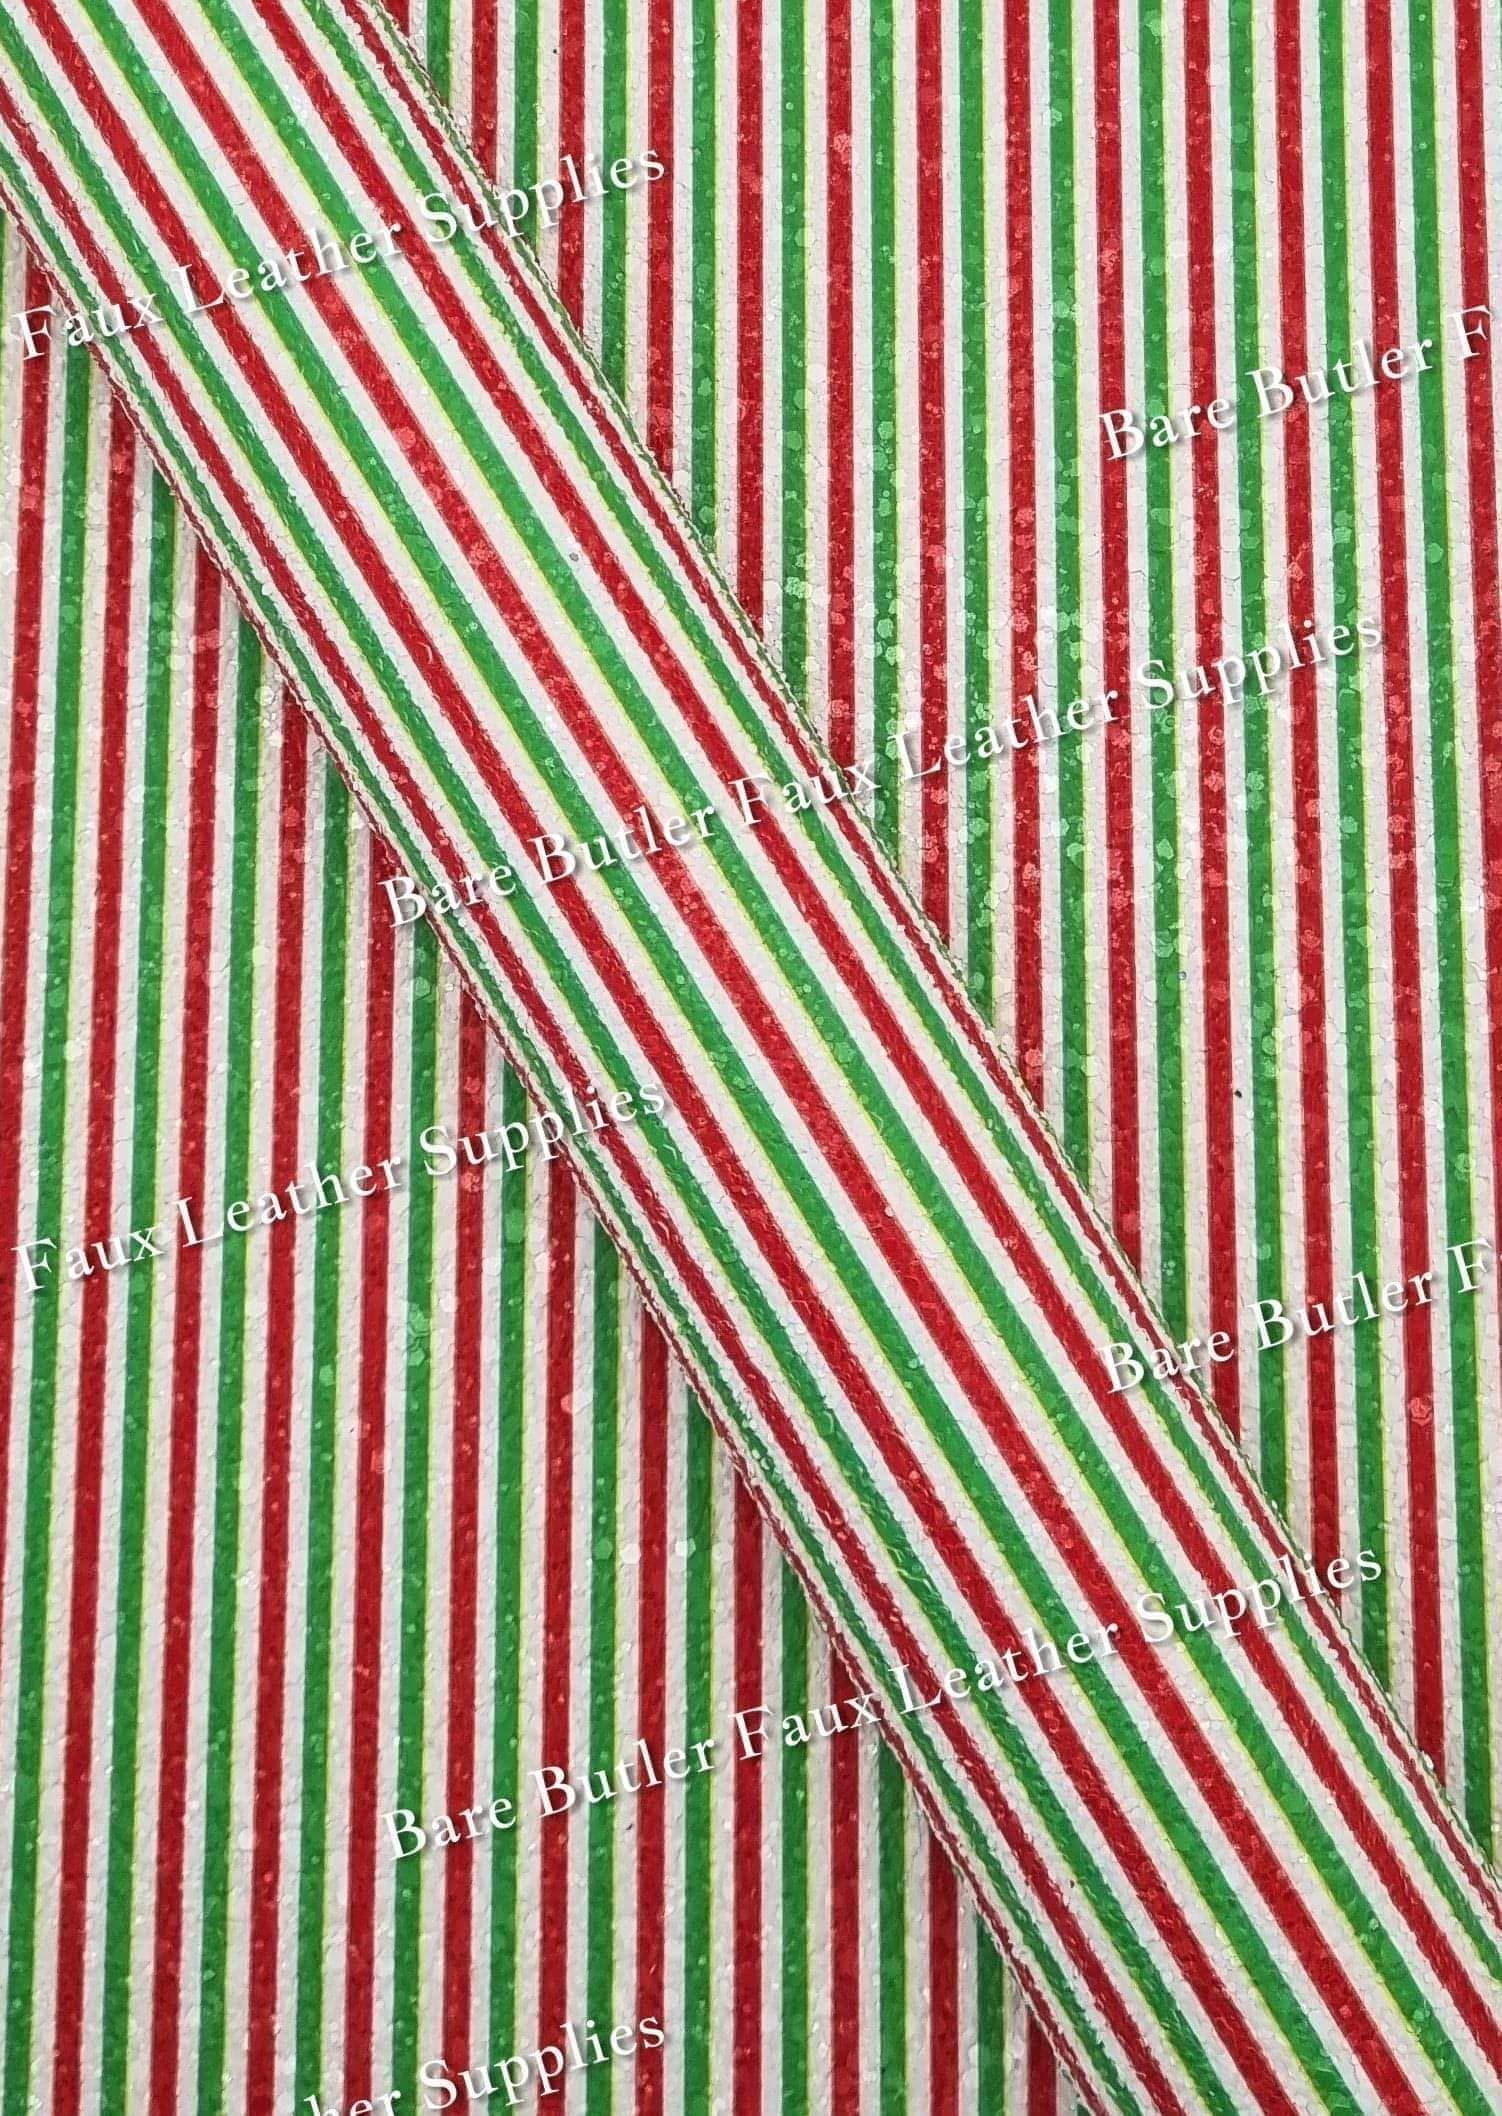 Chunky Glitter - Green & Red Christmas Stripes - christmas, Chunky, Faux, Faux Leather, glitter, green, leather, leatherette, Red, Stripe, Stripes - Bare Butler Faux Leather Supplies 